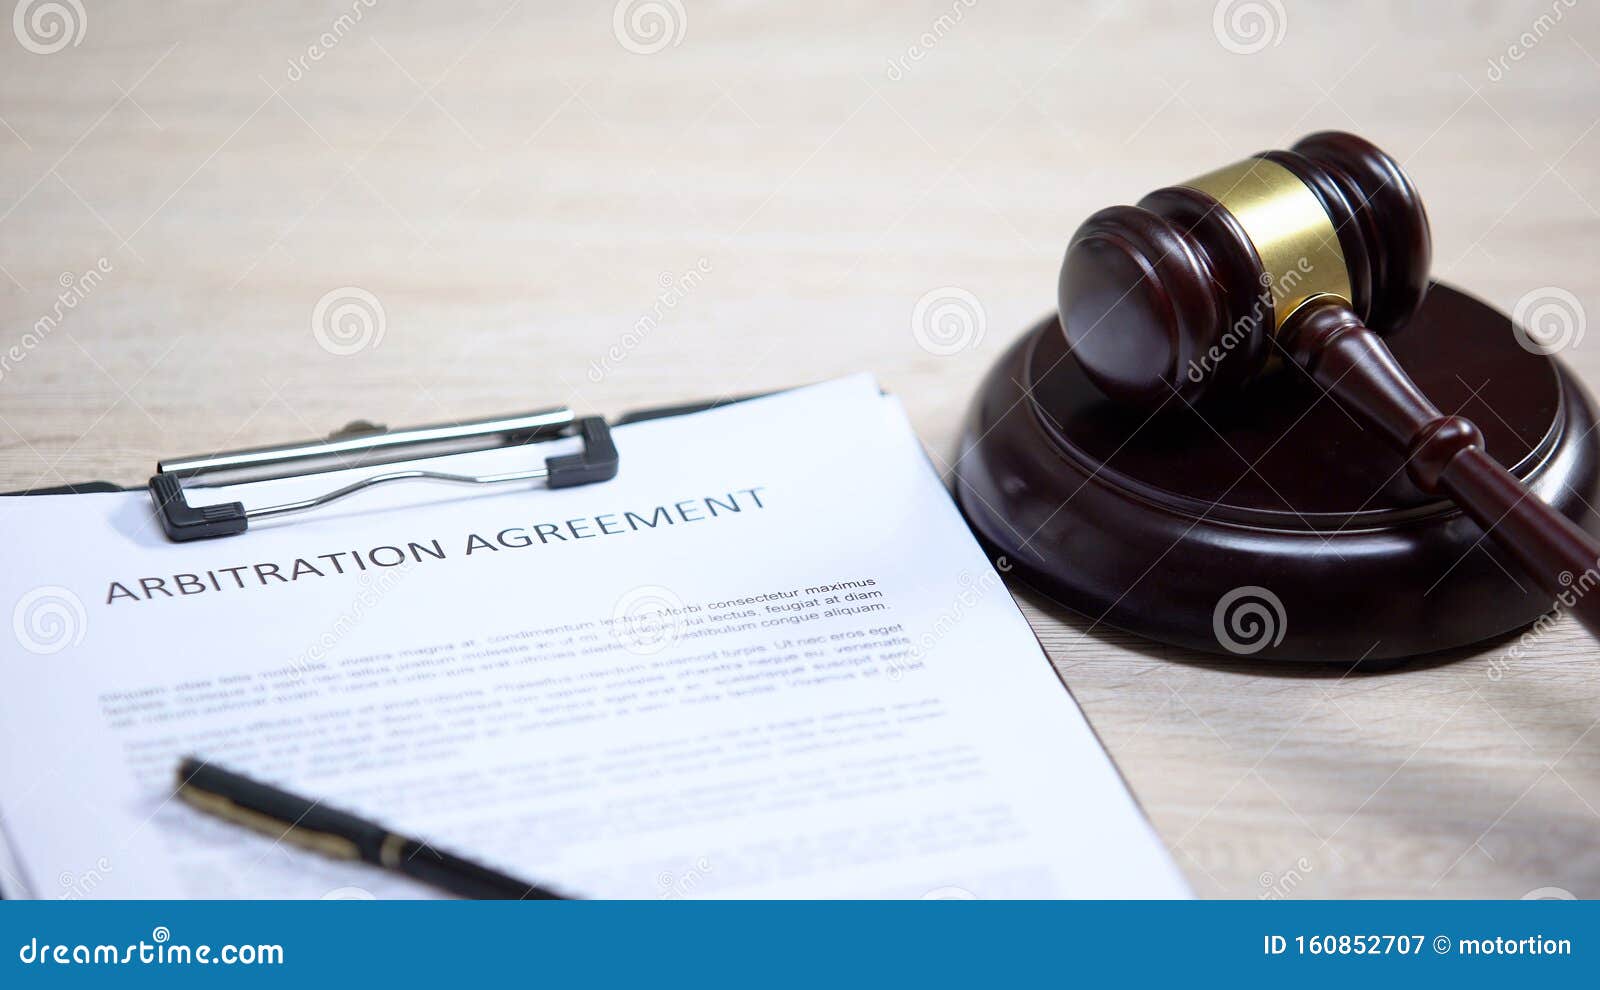 arbitration agreement document on table, gavel lying on sound block, dispute